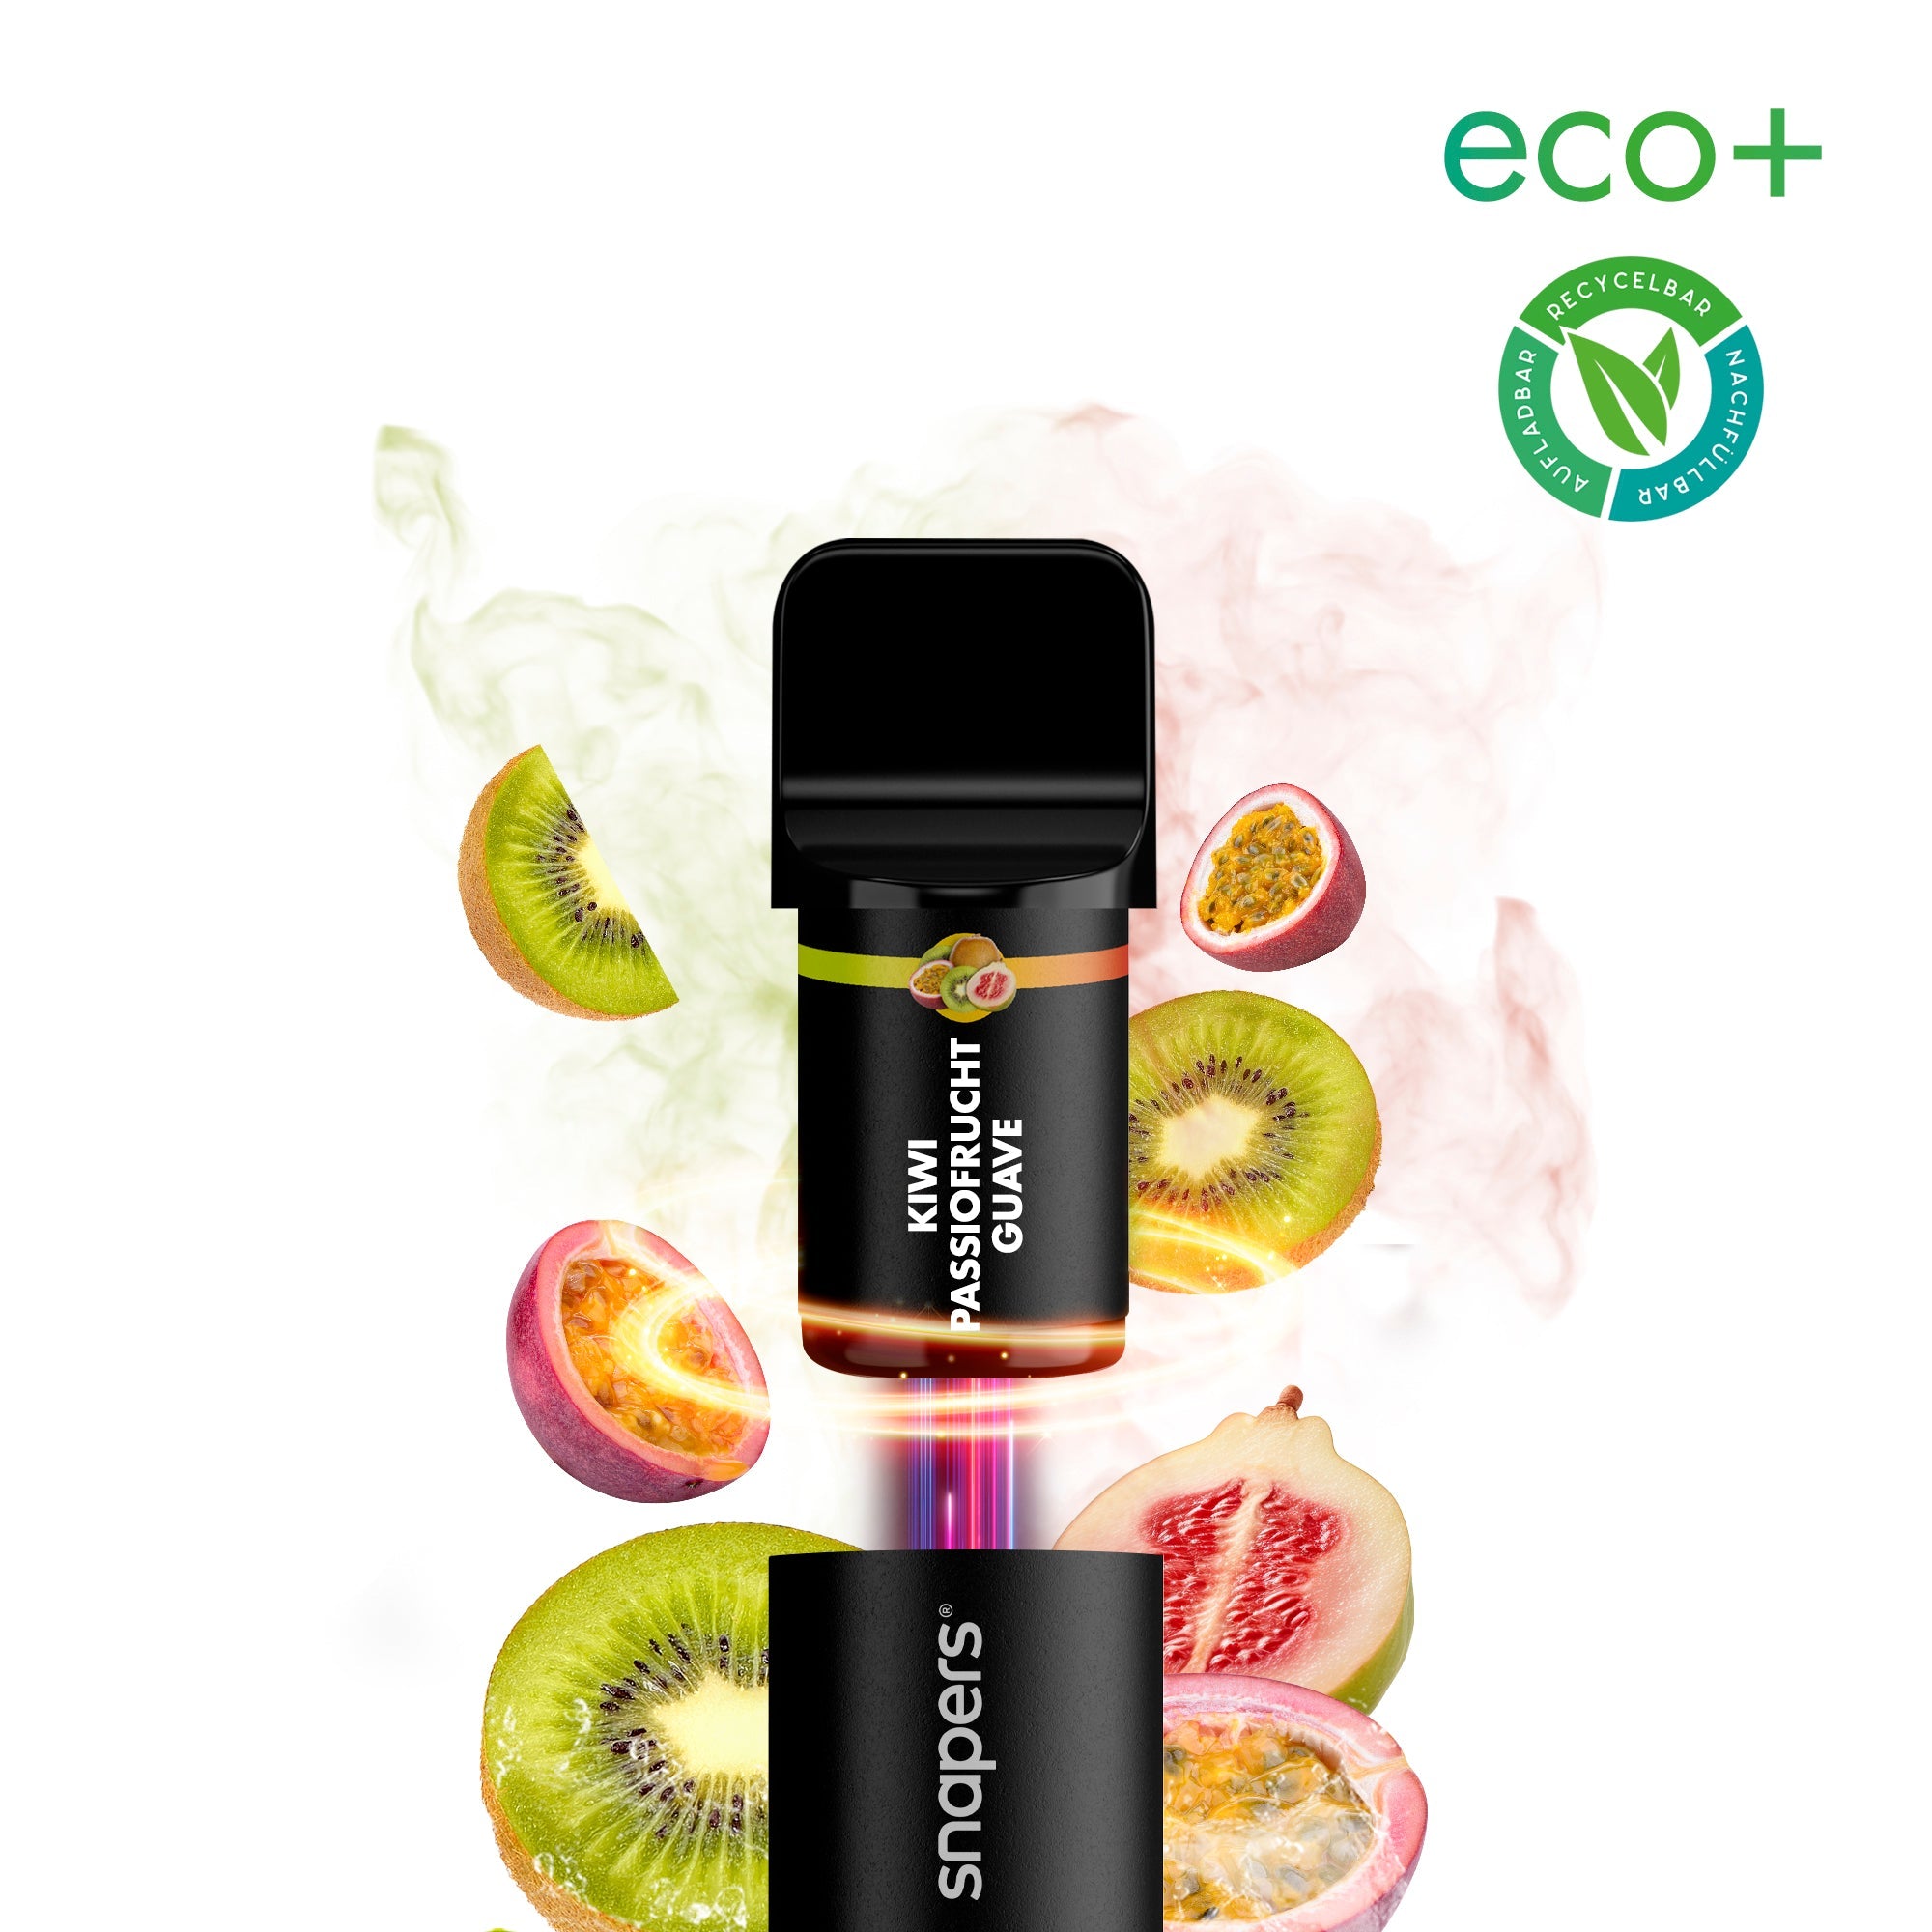 Snapers Eco+ 800 - Kiwi Passionsfrucht Guave